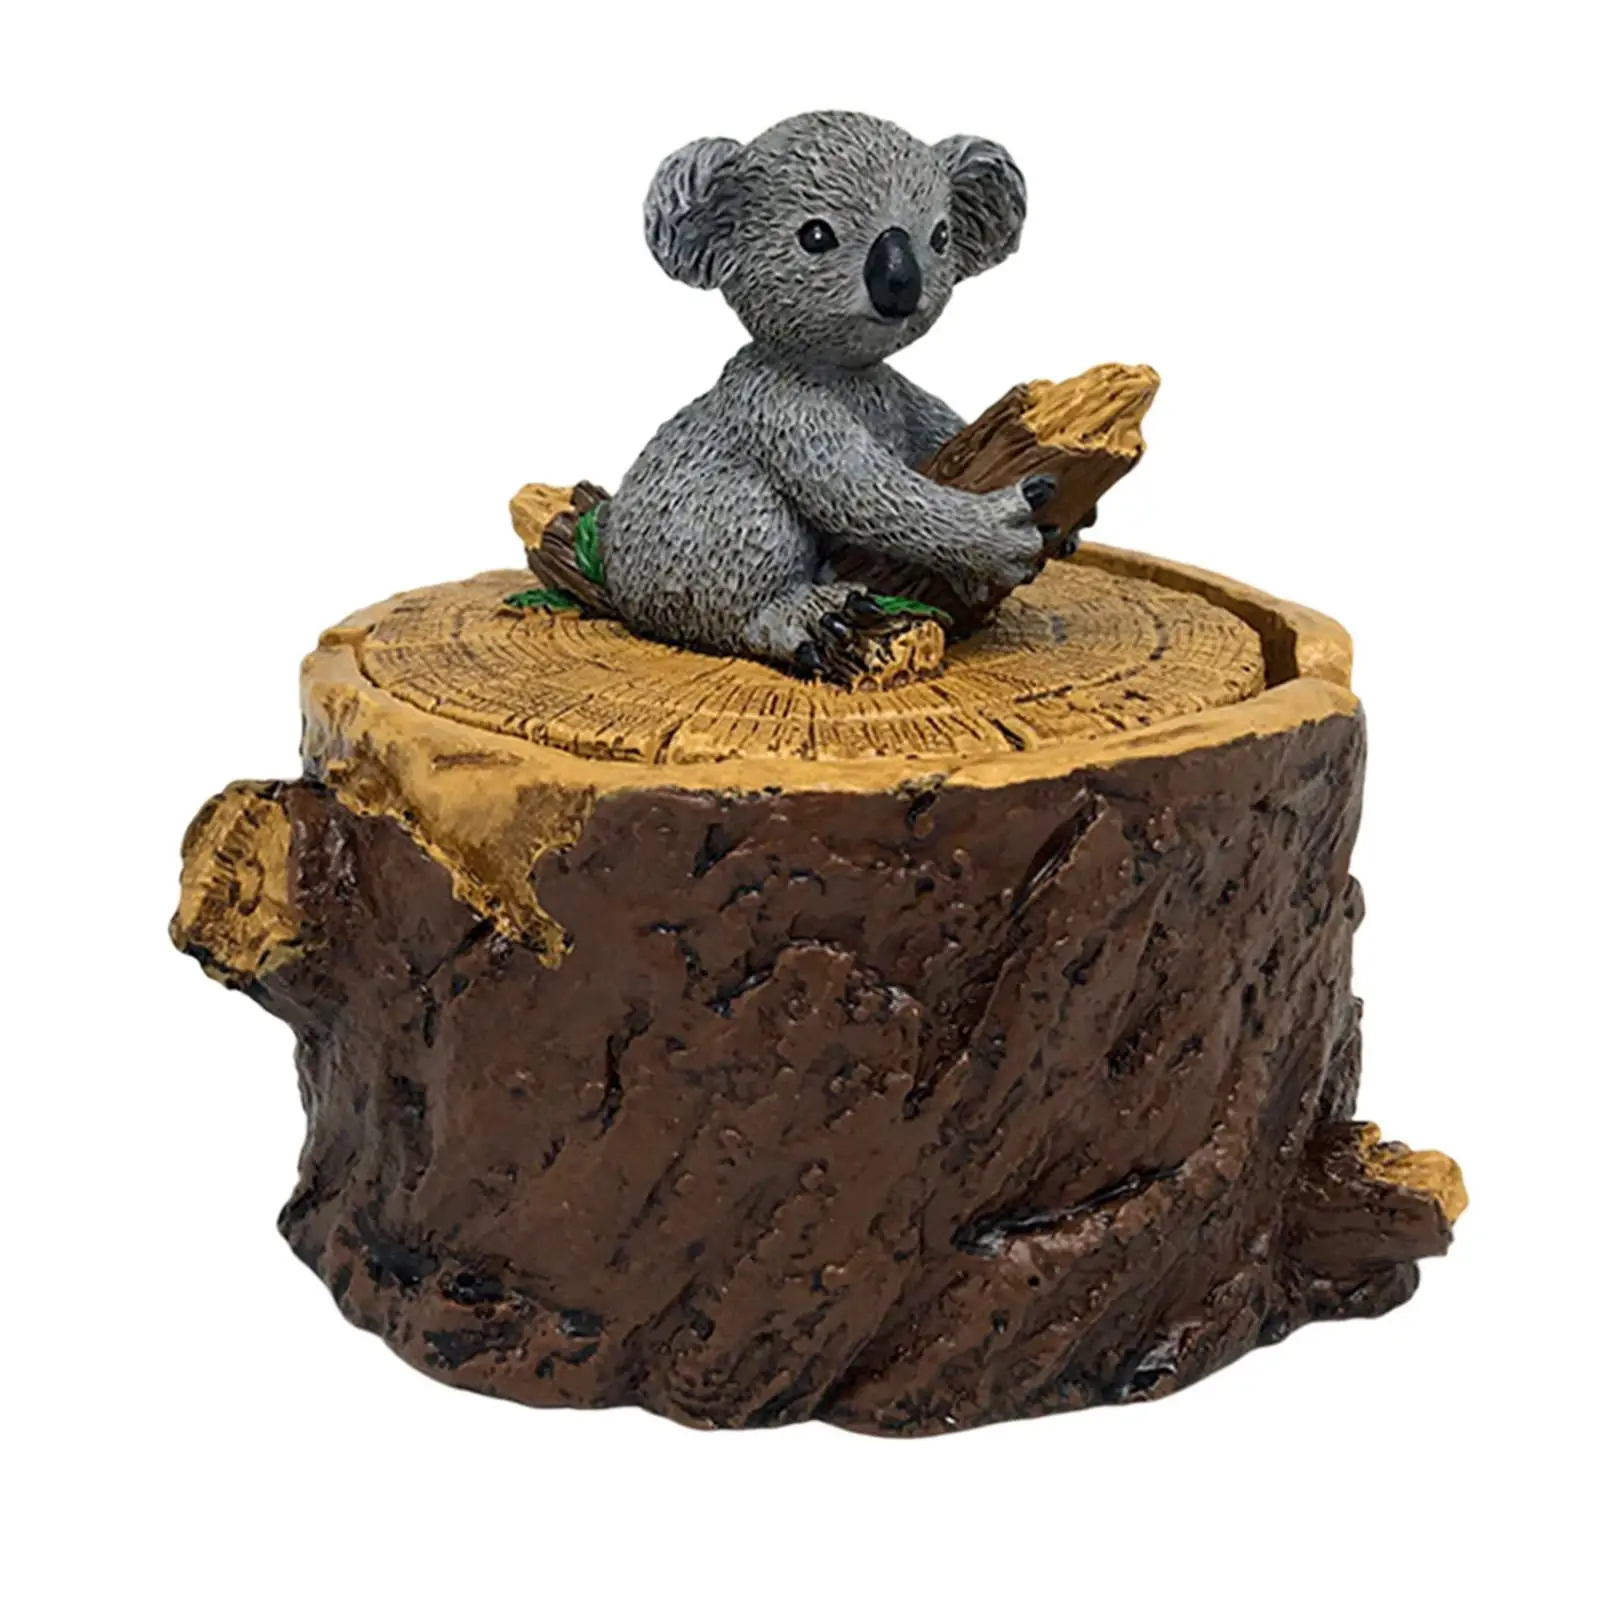 Animal Ashtray Decorative with Lid Accessories Gift Stable Retro Creative Novelty Organizer for Household Garden Desktop Outdoor